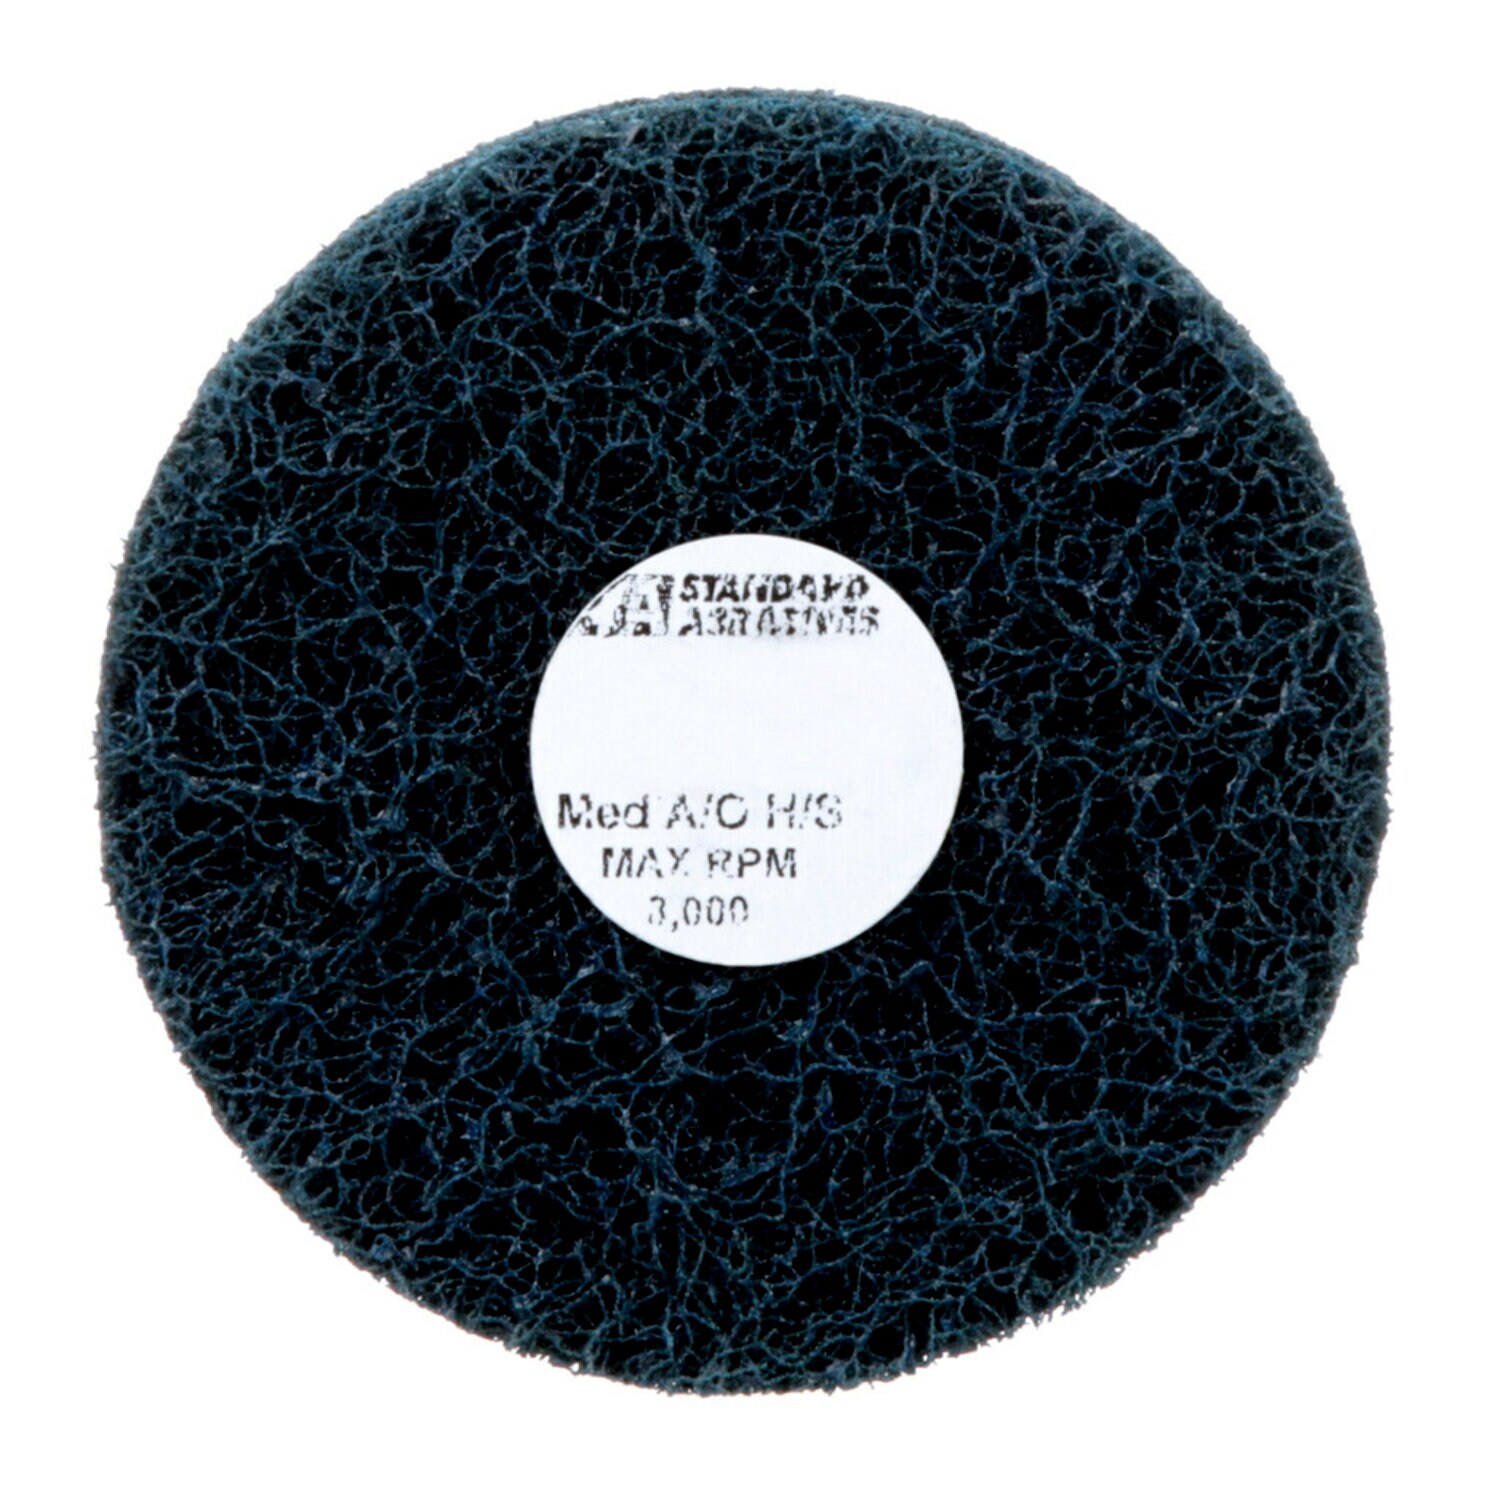 7100093311 - Standard Abrasives Buff and Blend HS Wheel 880475, 3 in x 2 Ply x 1/4
in A MED, 10/Carton, 100 ea/Case